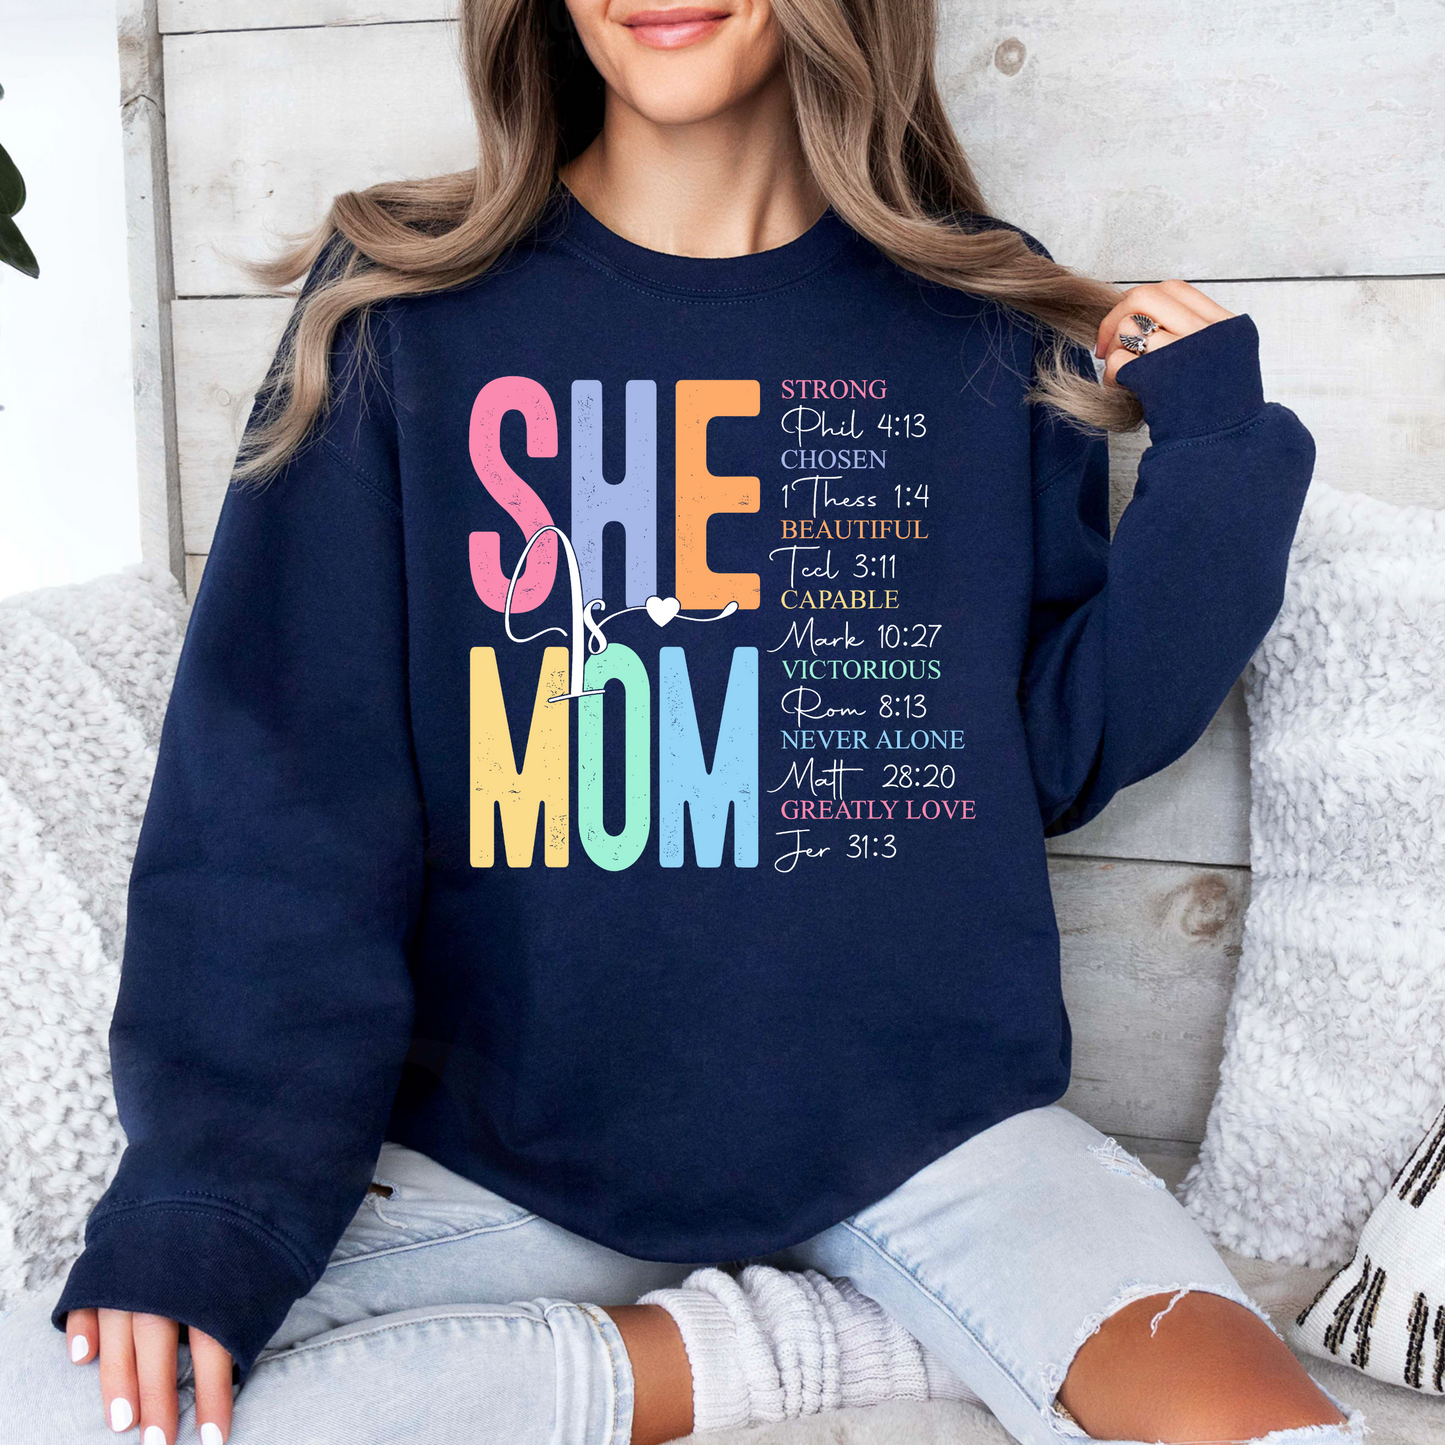 She is Mom - Powerful Bible Verses for Mother's Day